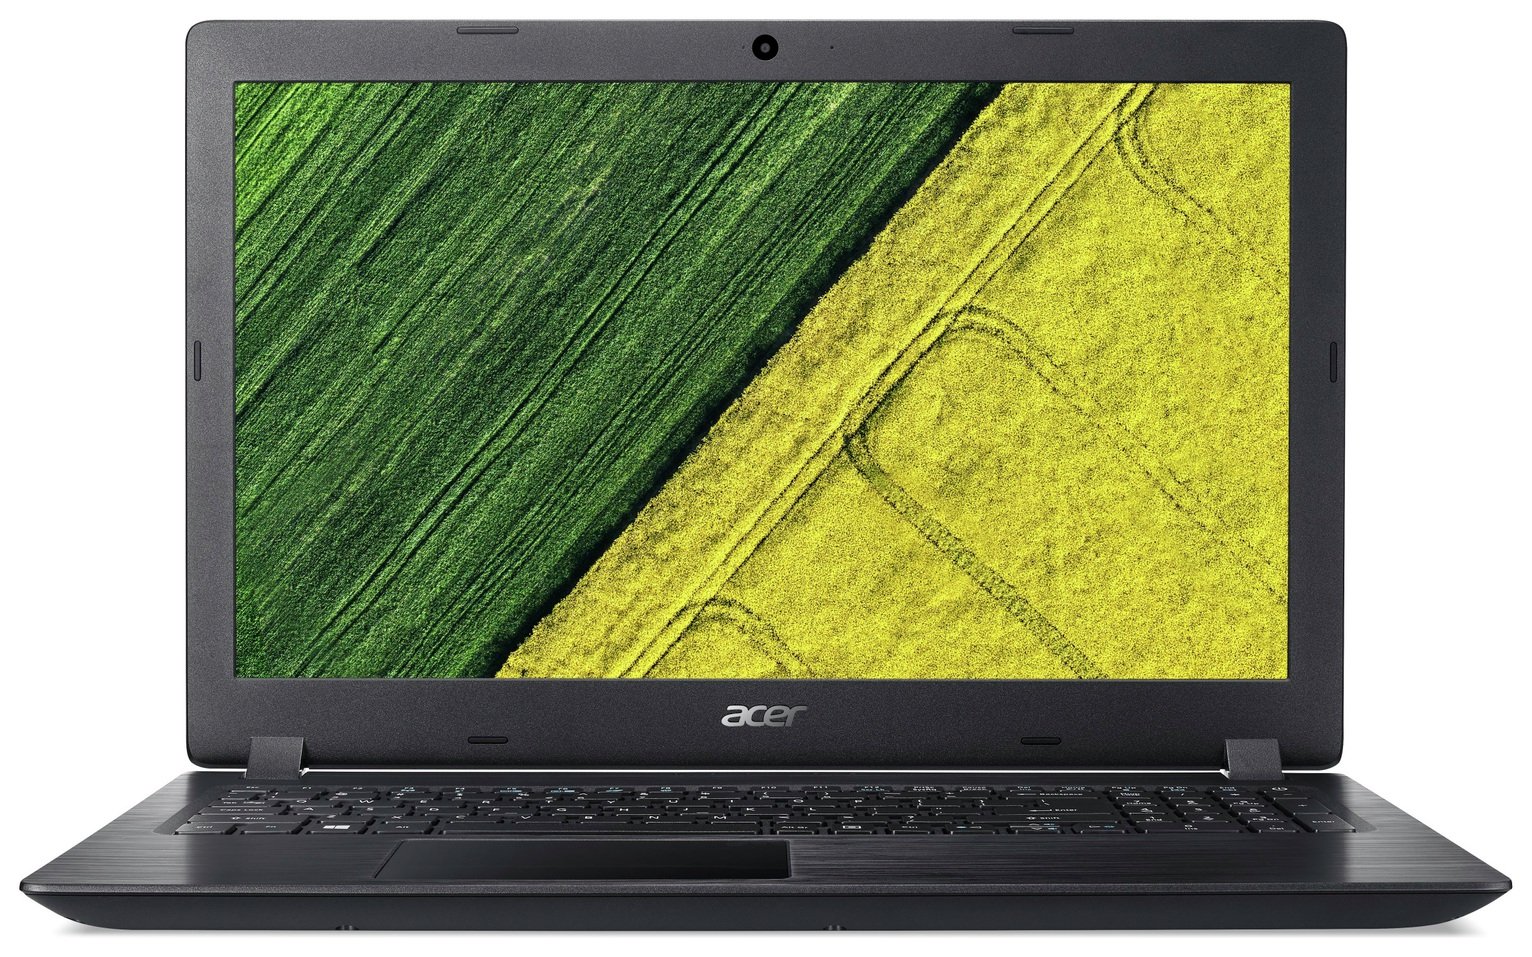 Acer Aspire 3 15.6 Inch i5 8GB 1TB Laptop - Black Review thumbnail